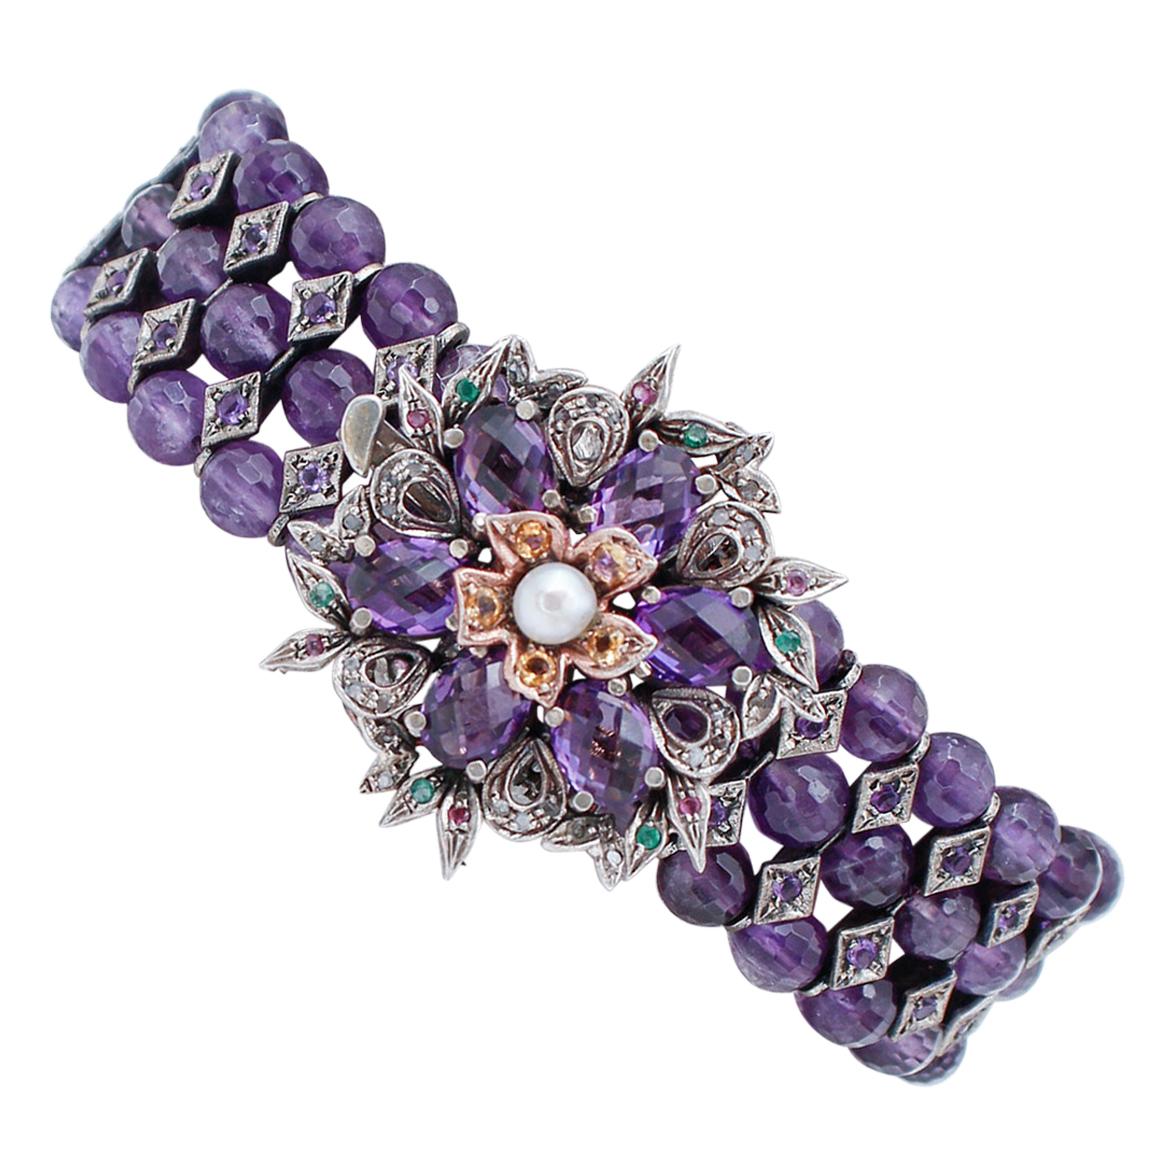 Diamonds Emeralds Rubies Hydro Amethysts Stones Pearl Gold and Silver Bracelet For Sale